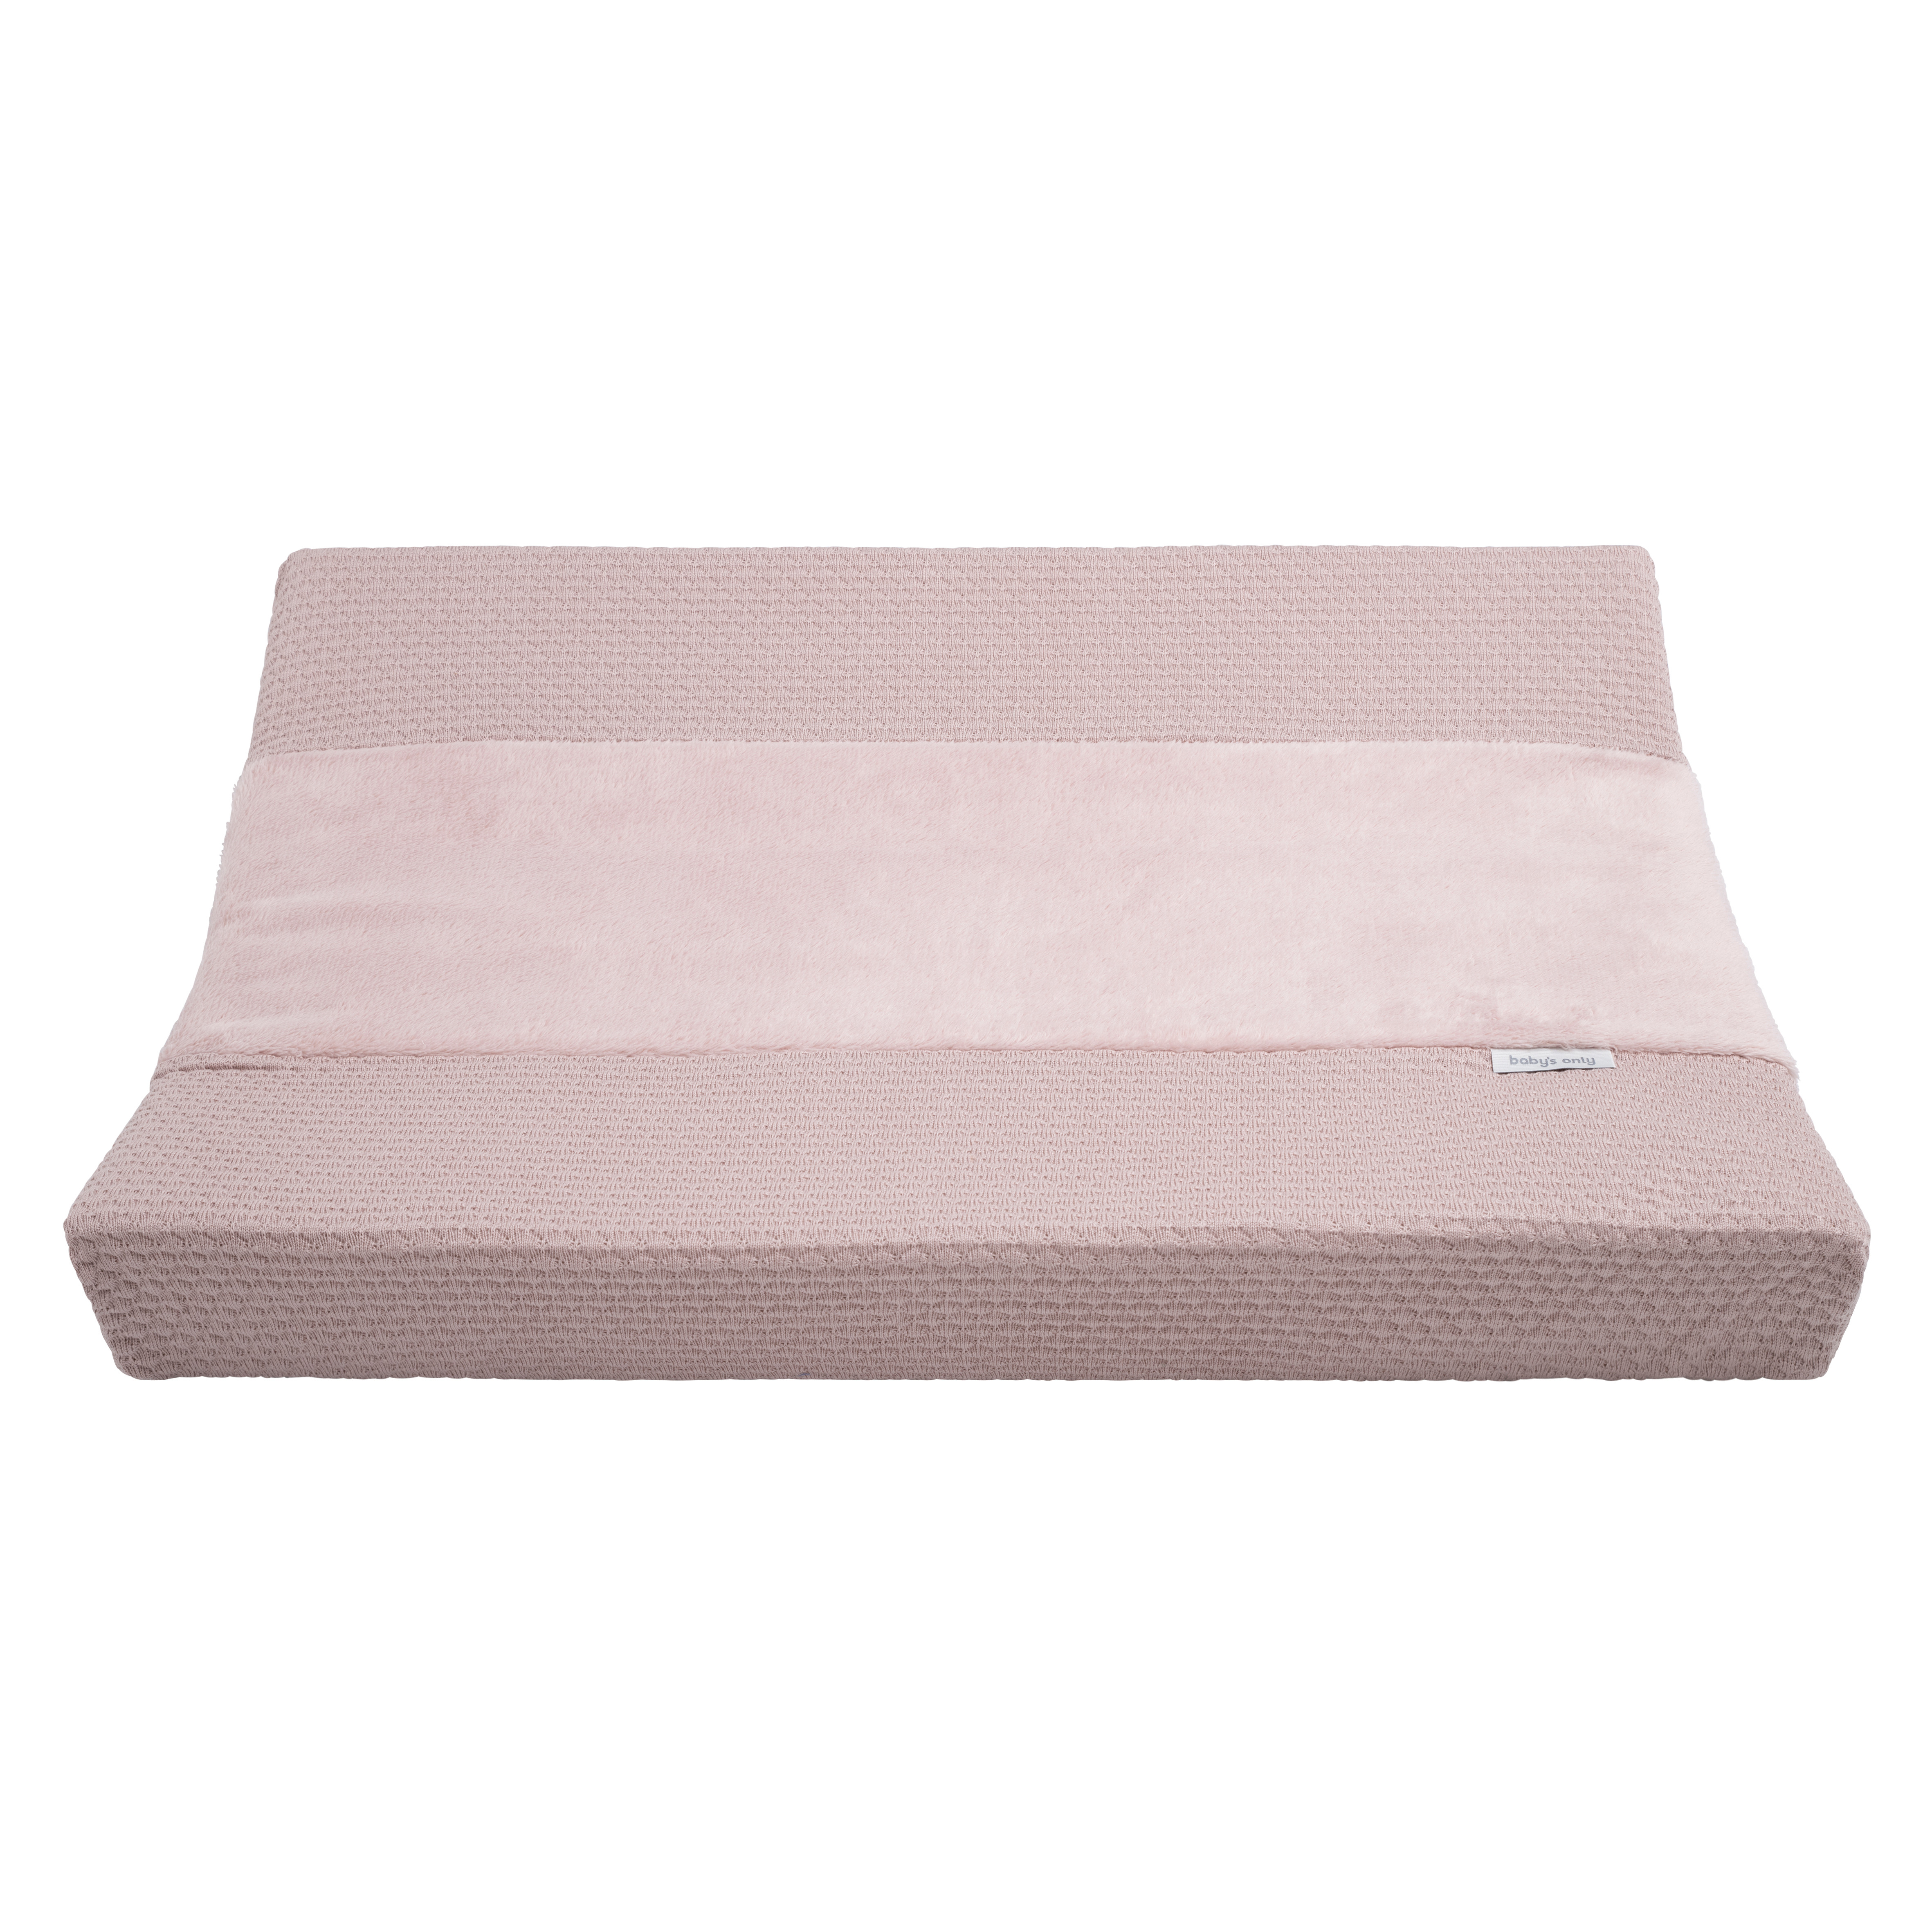 Changing pad cover Sky old pink - 45x70